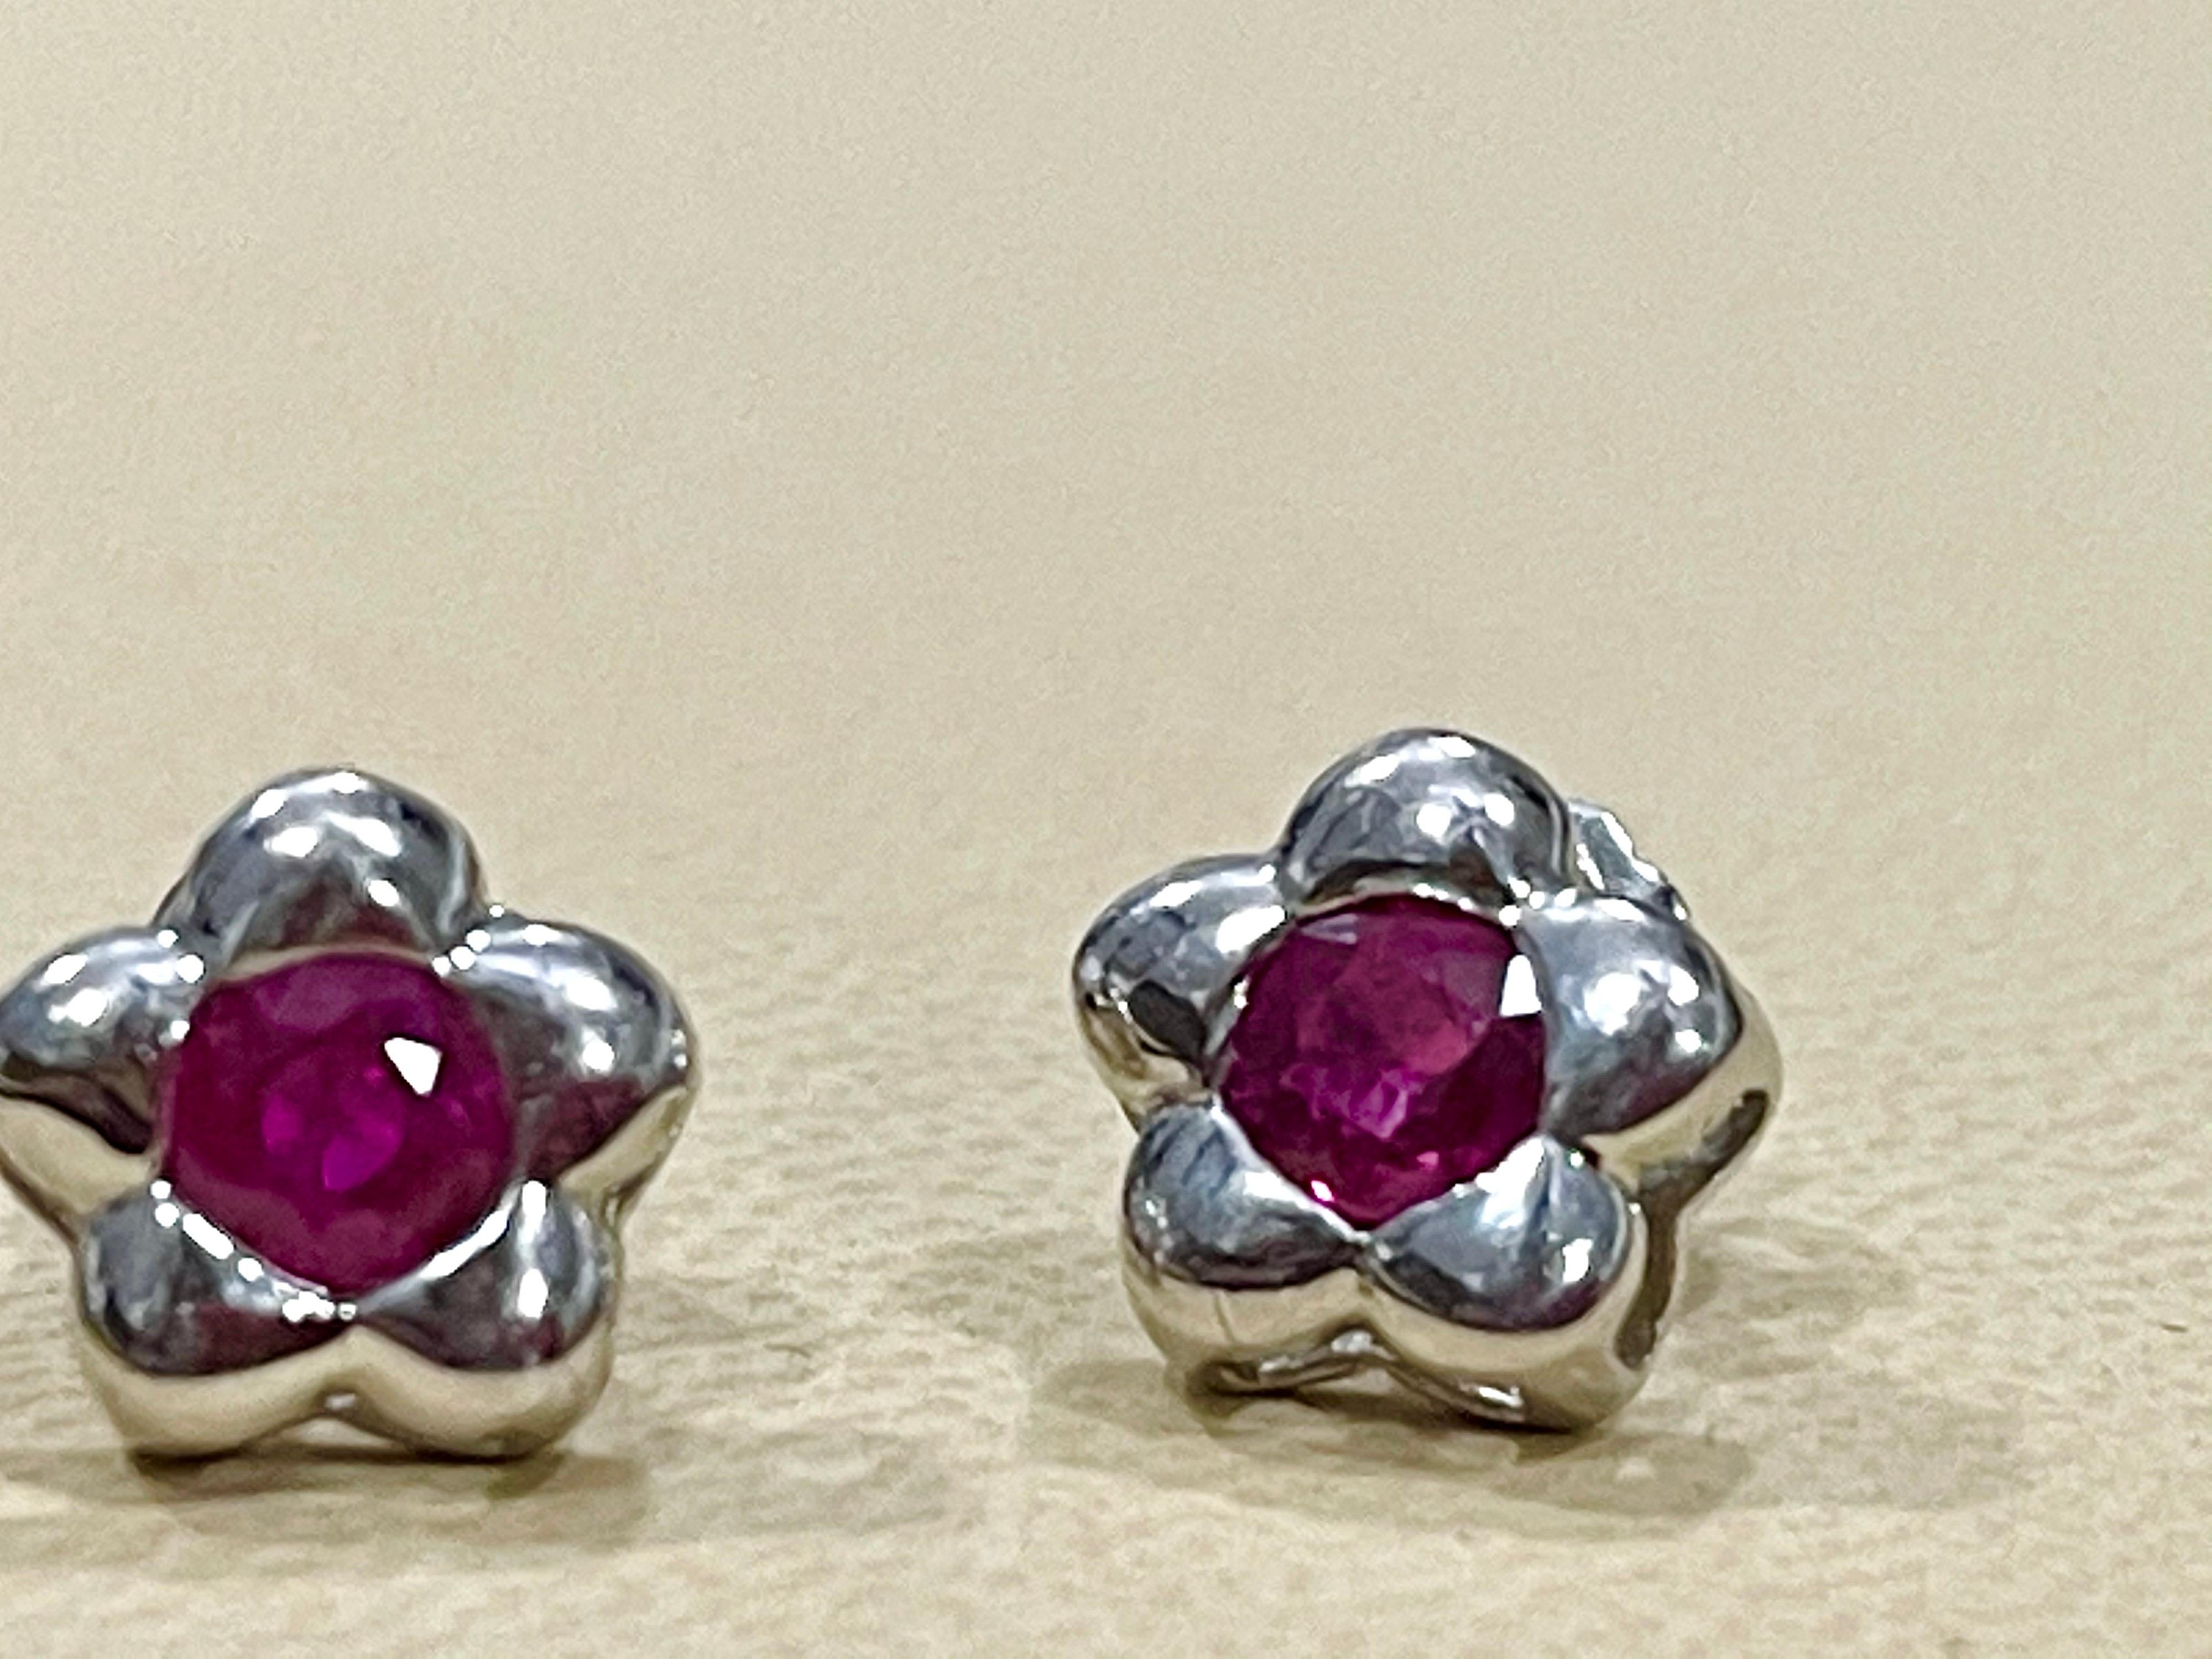 1 Carat Natural Round Ruby Stud Earrings 14 Karat White Gold, Post Back In Excellent Condition For Sale In New York, NY